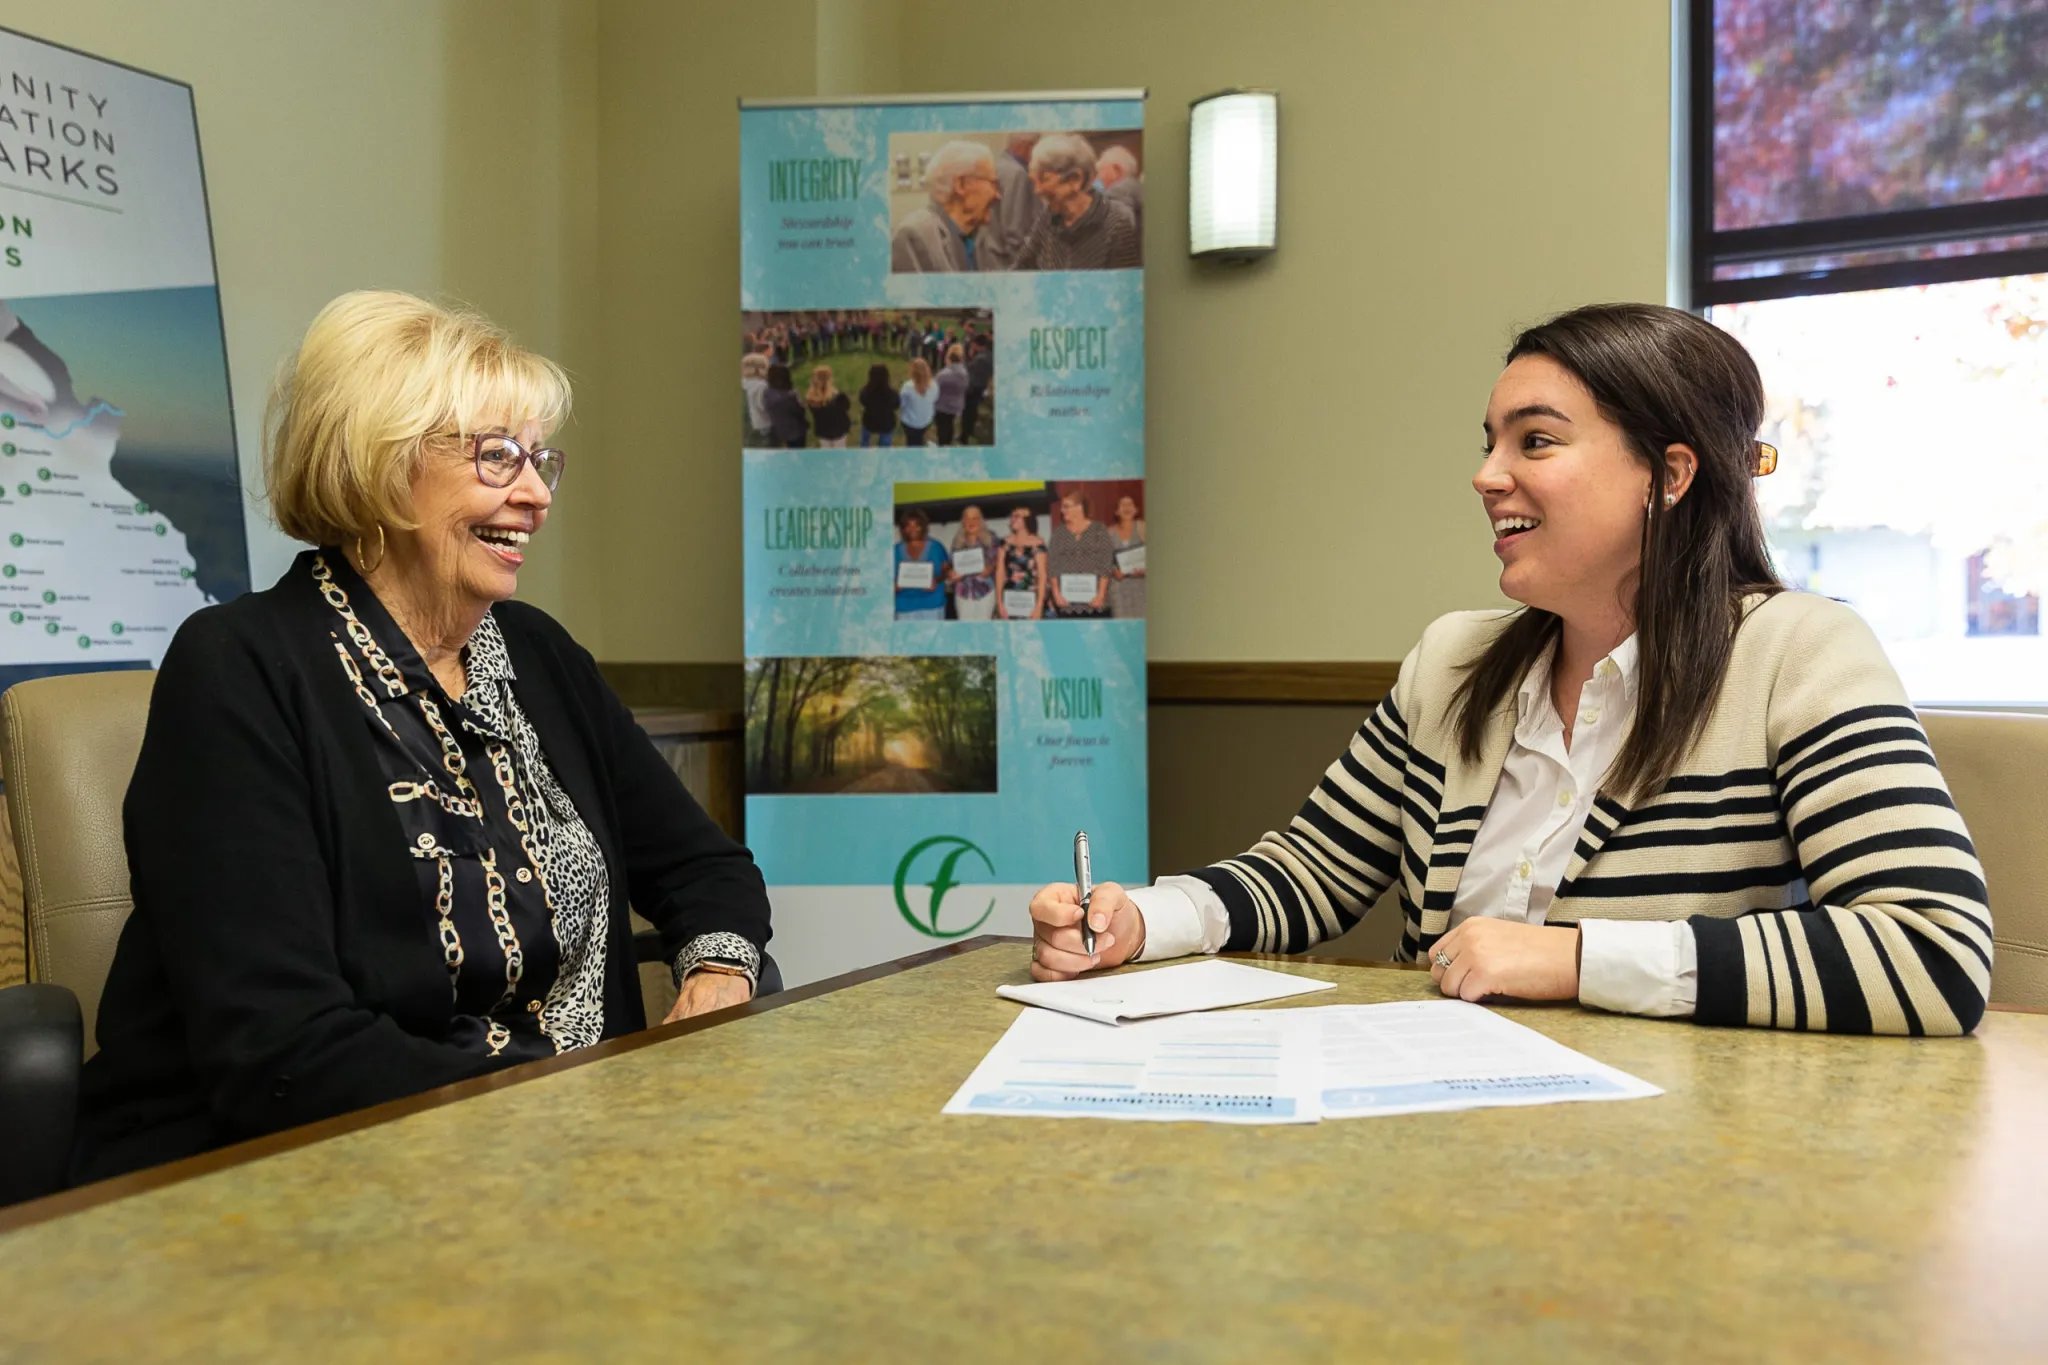 Patti Penny, founder of Penmac Staffing, chats with Caitlin Golike, director of donor services for the CFO, during a donor meeting at the CFO’s main office in Springfield. Penny has opted to donate her ownership shares of Penmac to support her charitable giving. (Photo provided by Community Foundation of the Ozarks)